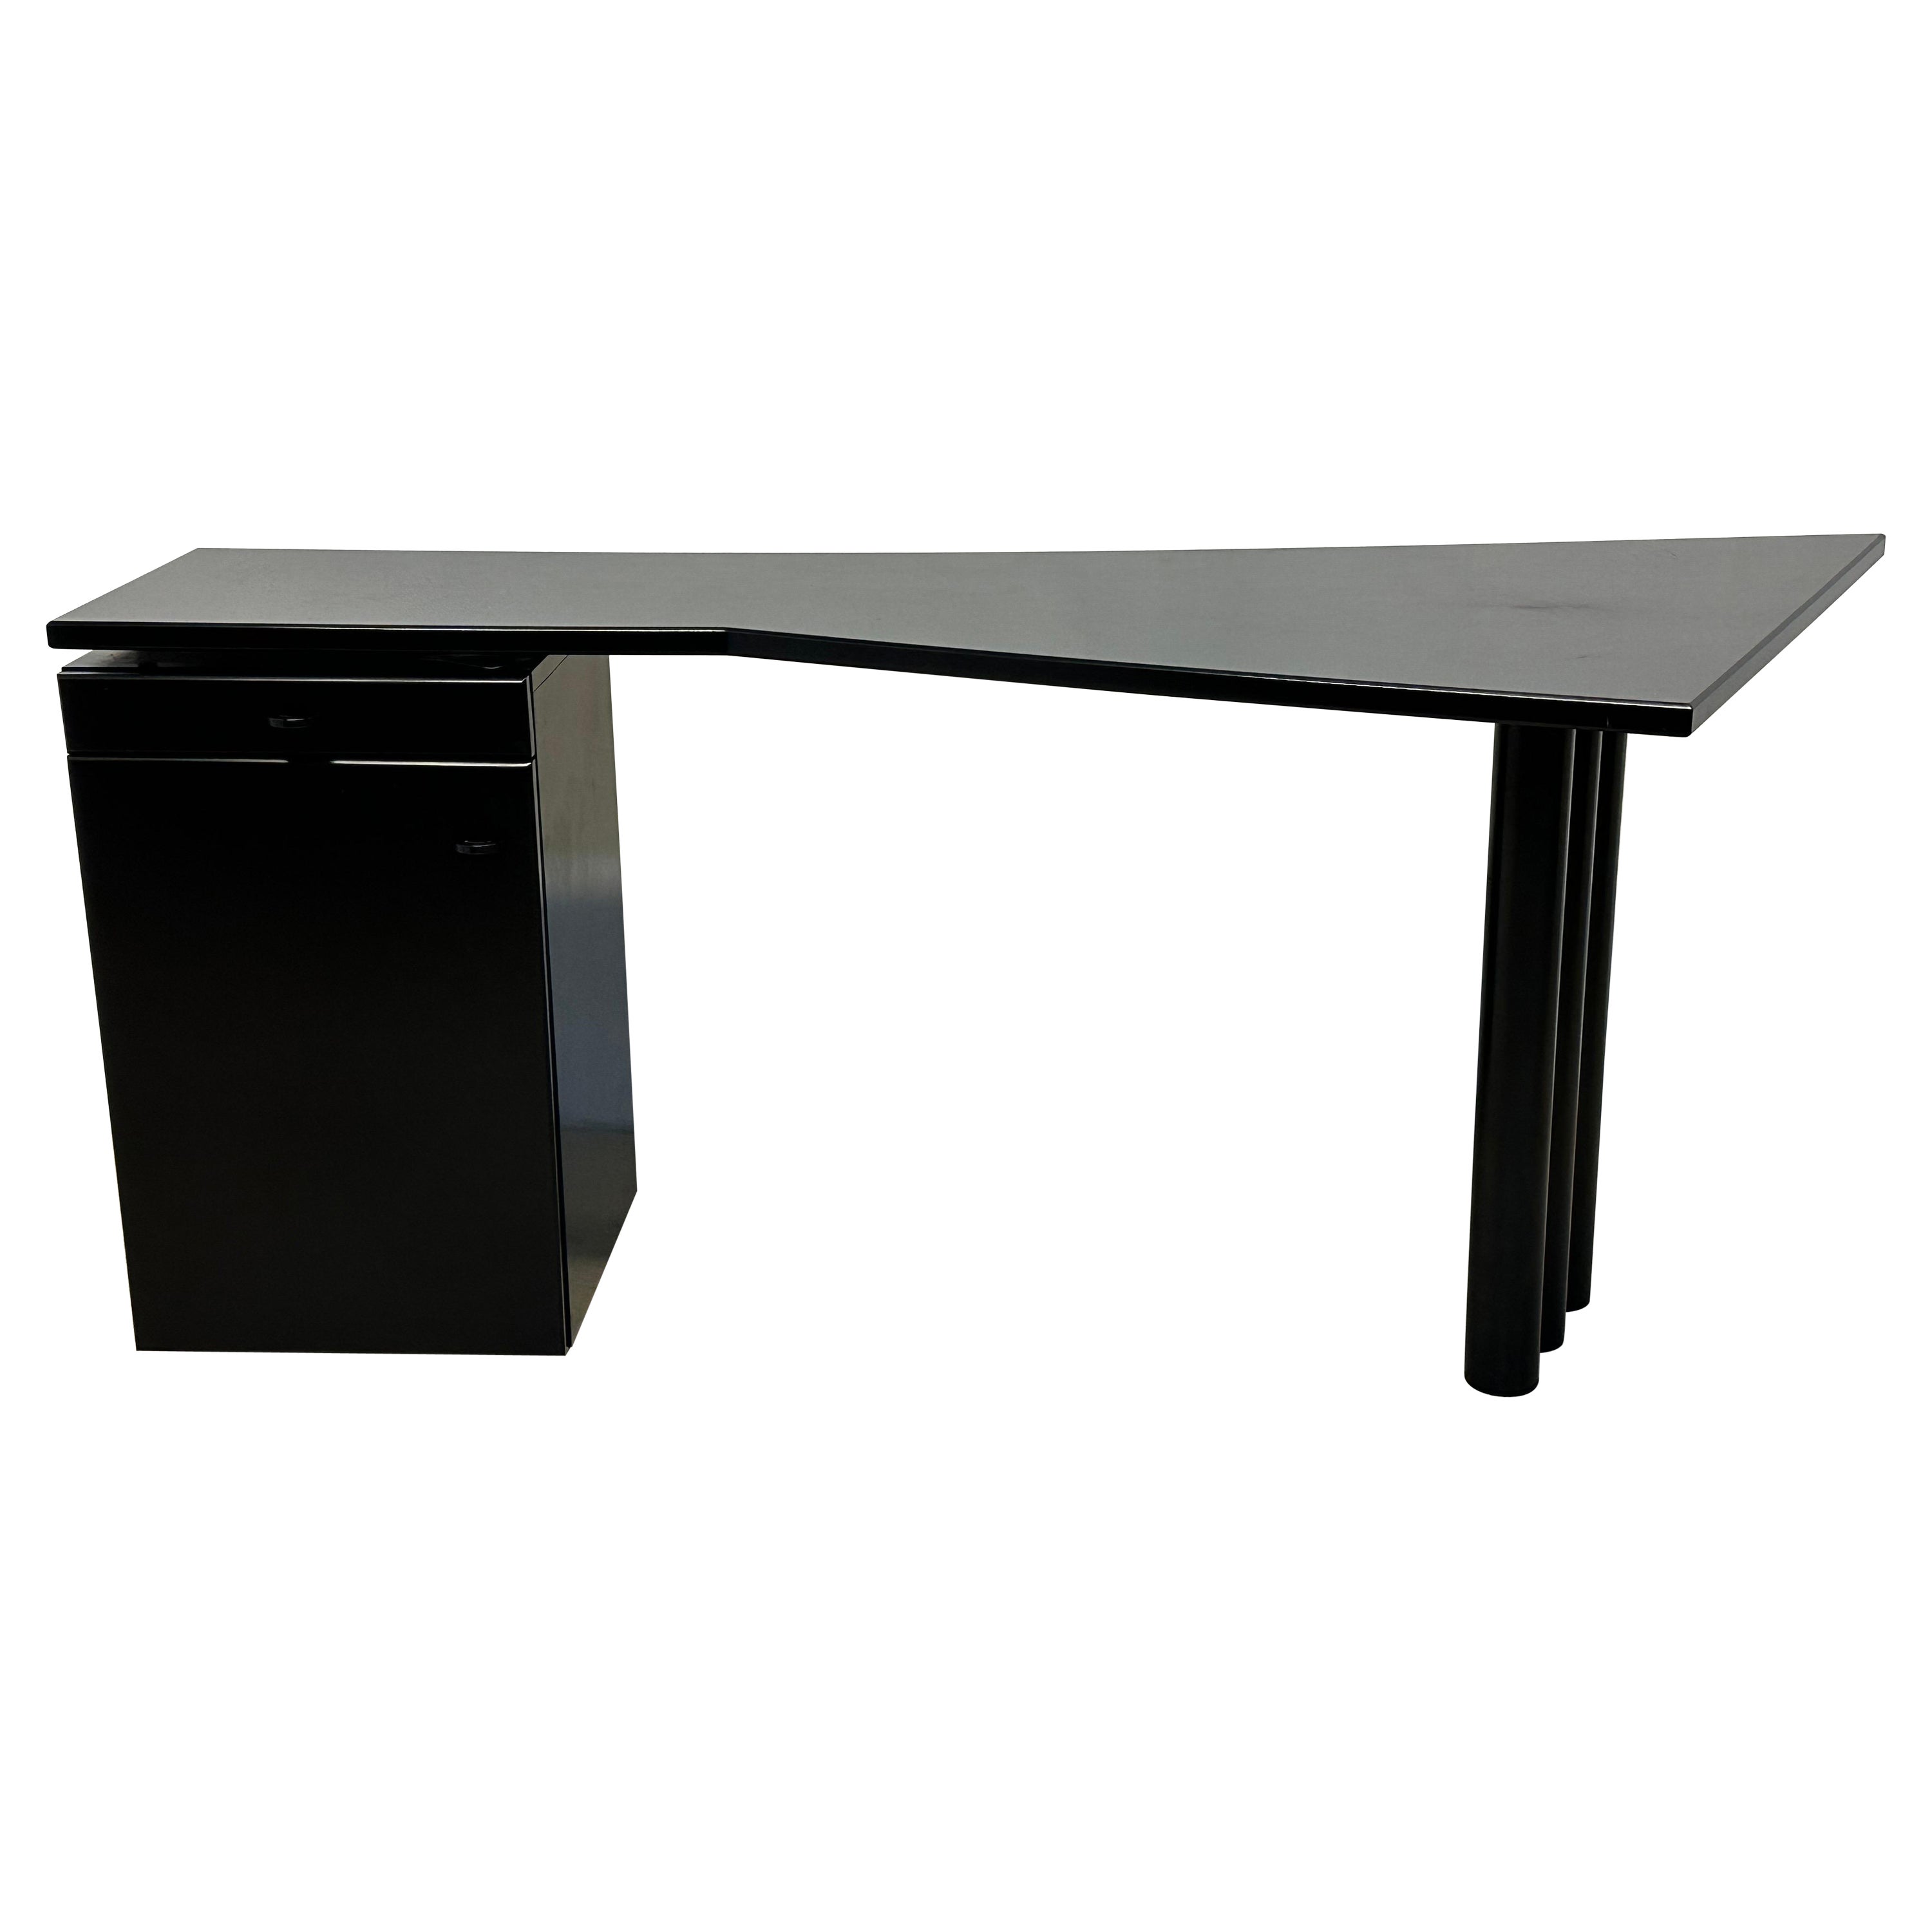 Postmodern Black Lacquered Desk by Interlubke, Germany 1980s For Sale